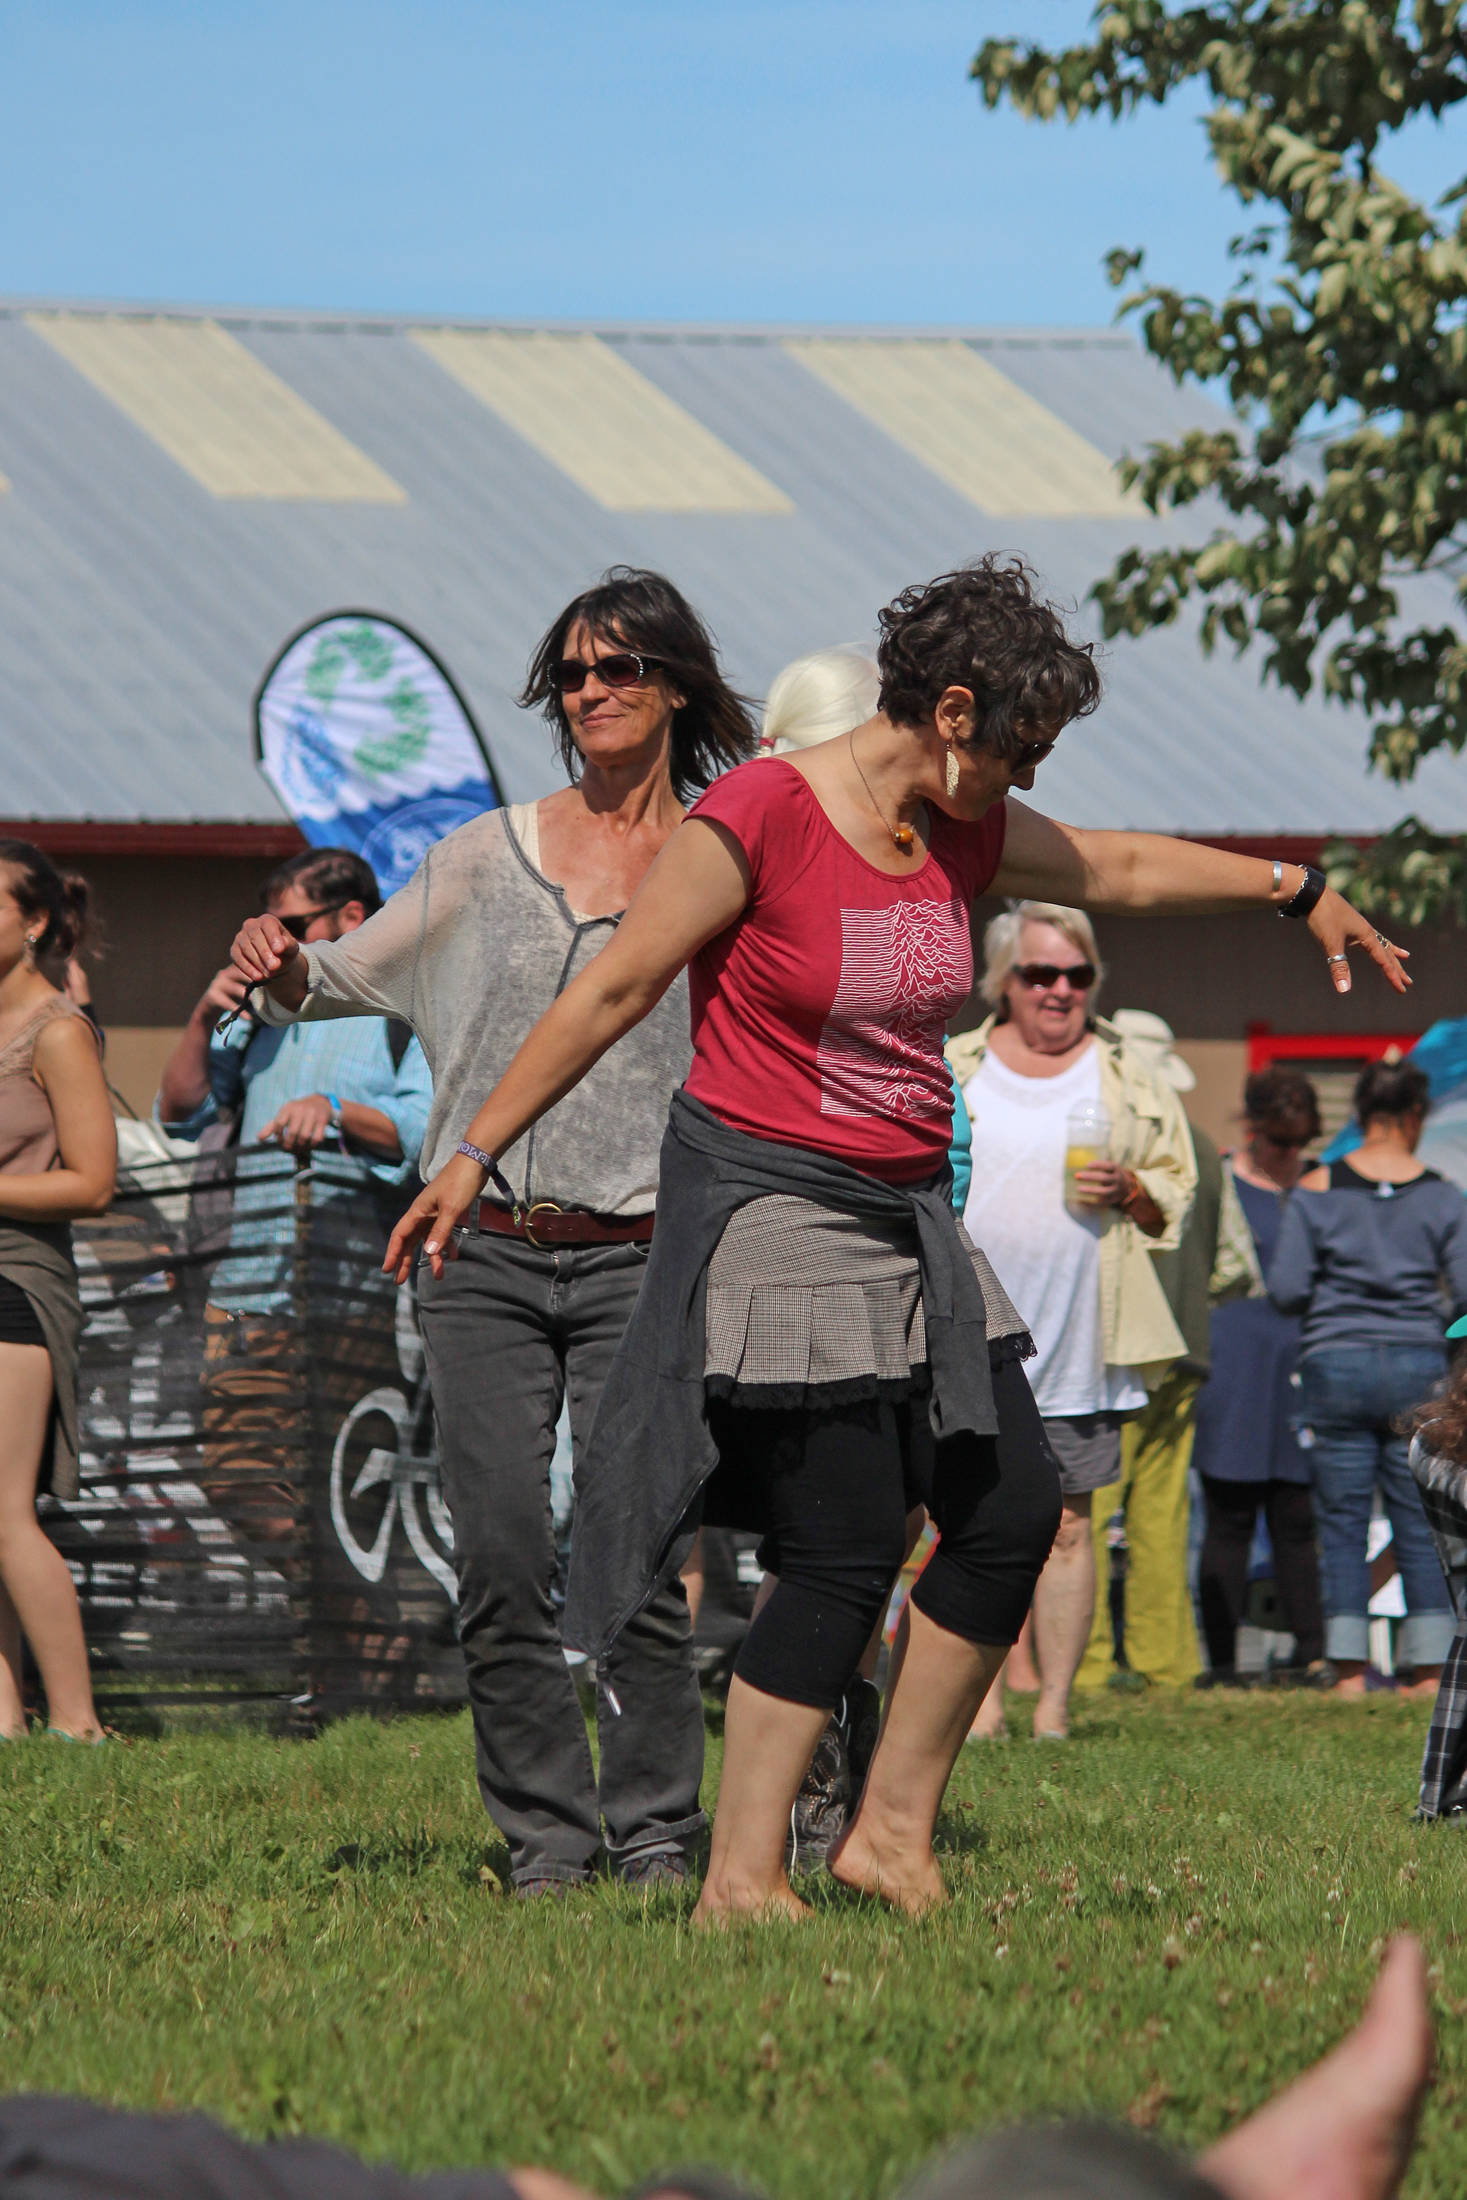 Women dance in the grass during a performance at the Ocean Stage on Friday, Aug. 2, 2019 at Salmonfest in Ninilchik, Alaska. (Photo by Megan Pacer/Homer News)